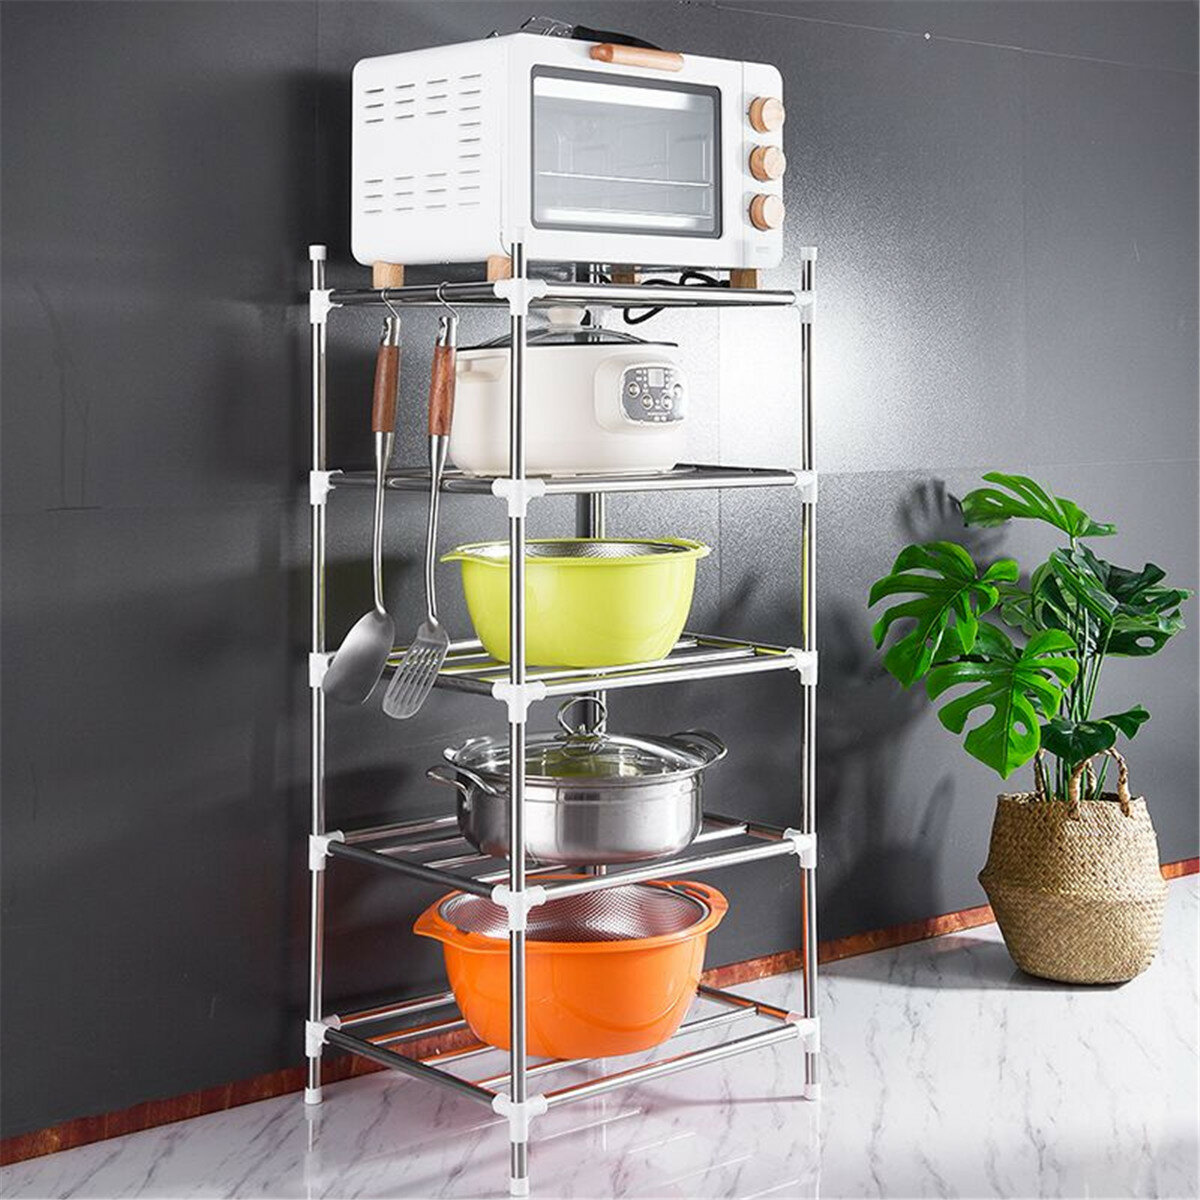 

201 Stainless Steel 5 layers Landing Storage Rack for Home Kitchen Shelf Arrangement Tool